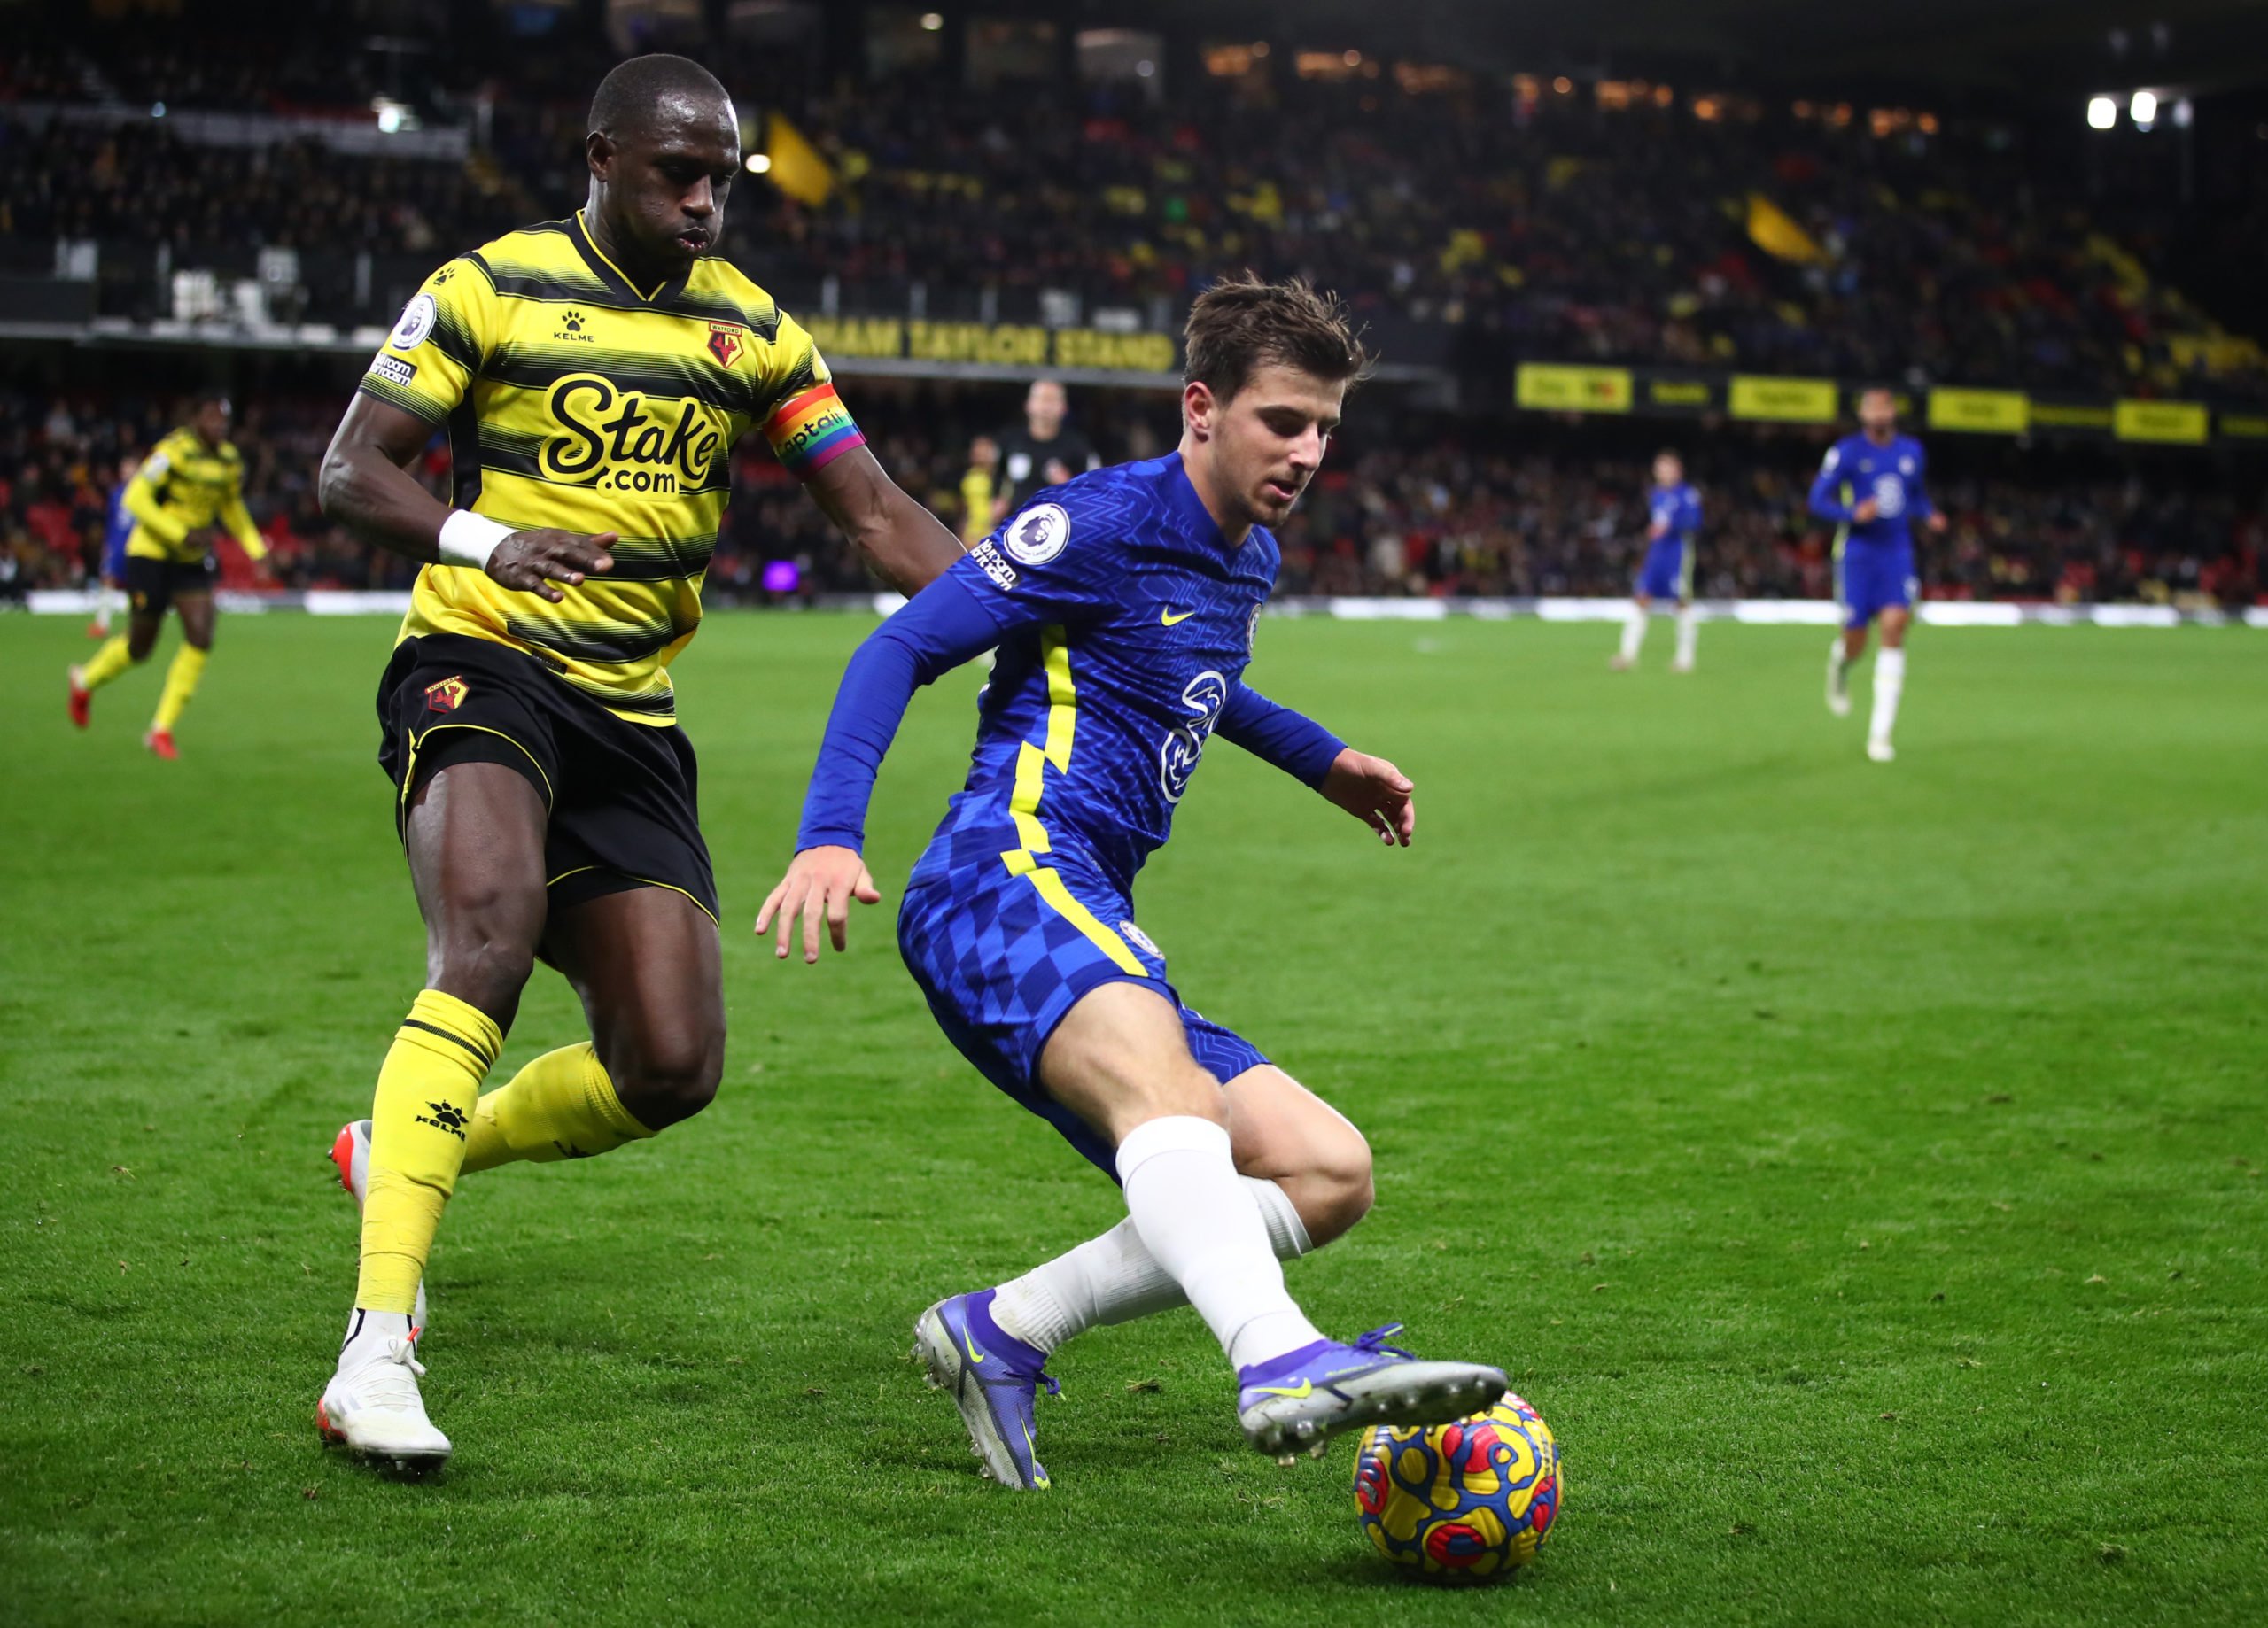 ‘Brilliant’: Mason Mount hails ‘very unselfish’ 22-year-old Chelsea star after Watford victory